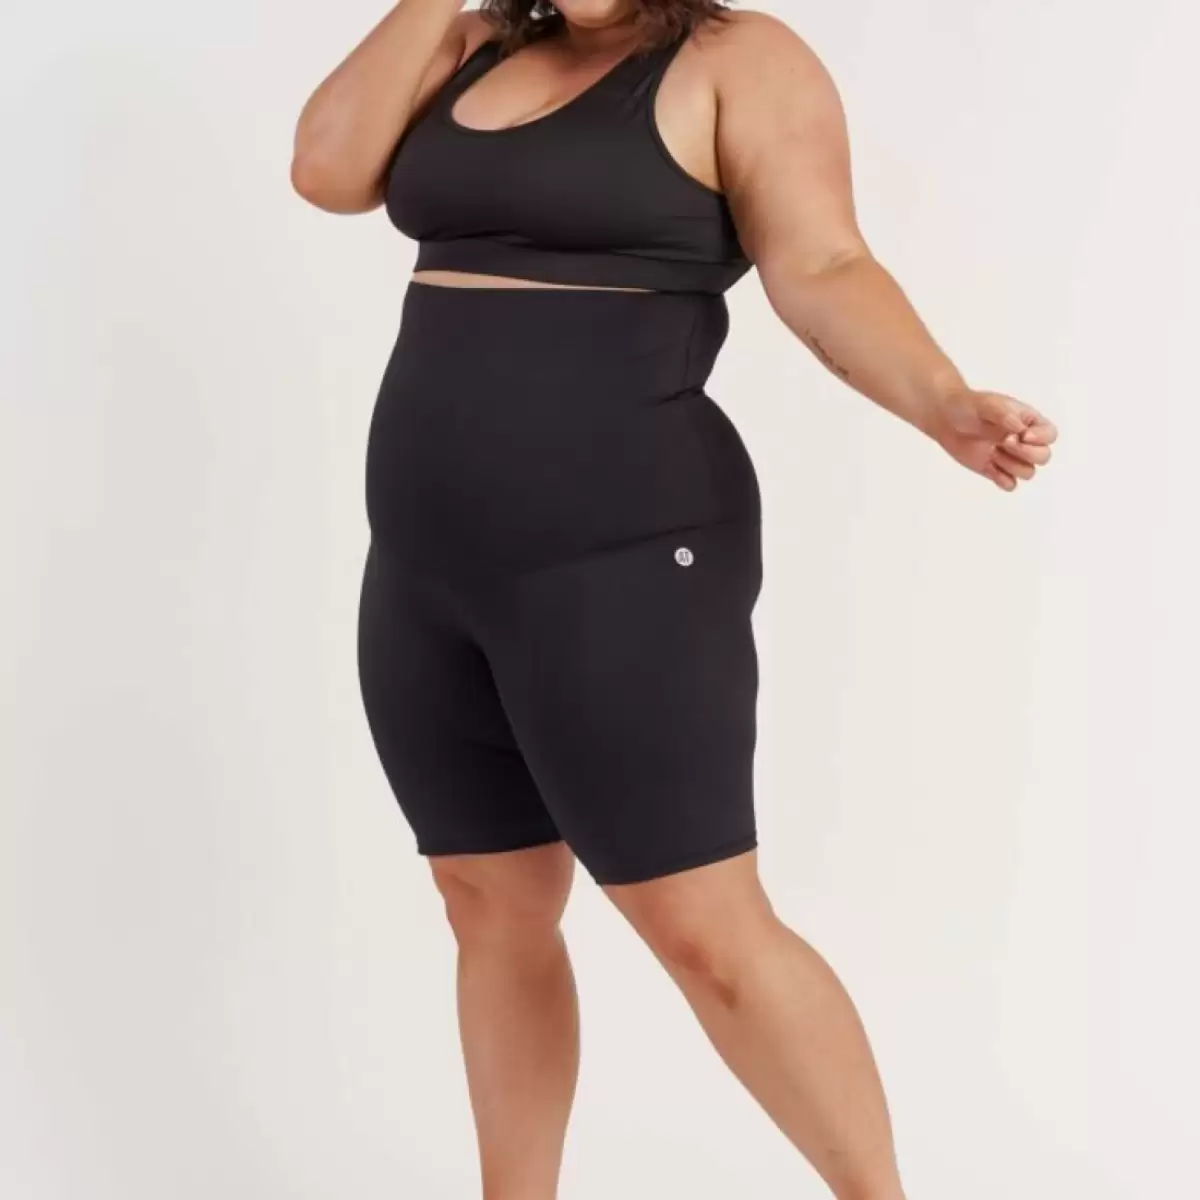 High Waist Postpartum Recovery Shorts in Black by Queen Bee